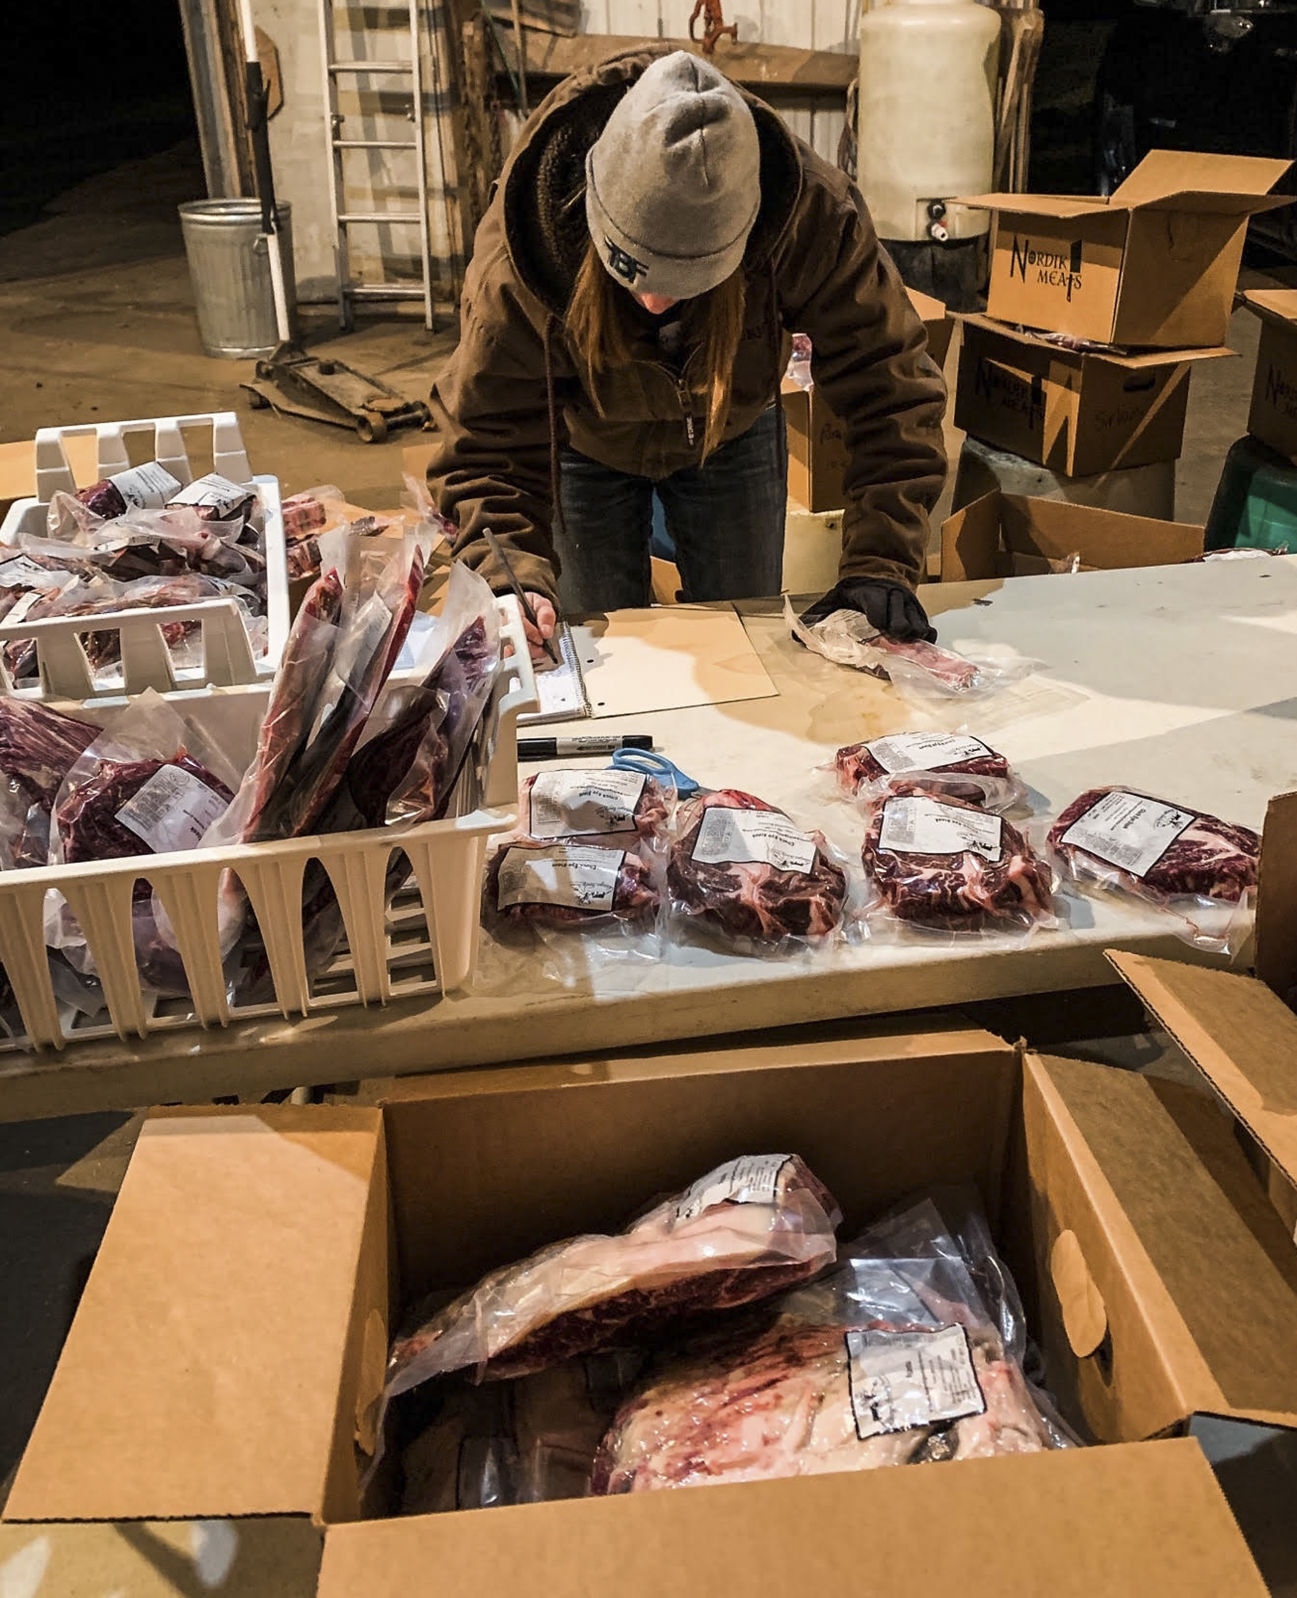 Lillie Beringer prepares a shipment of Angus beef cuts. PHOTO CREDIT: Contributed